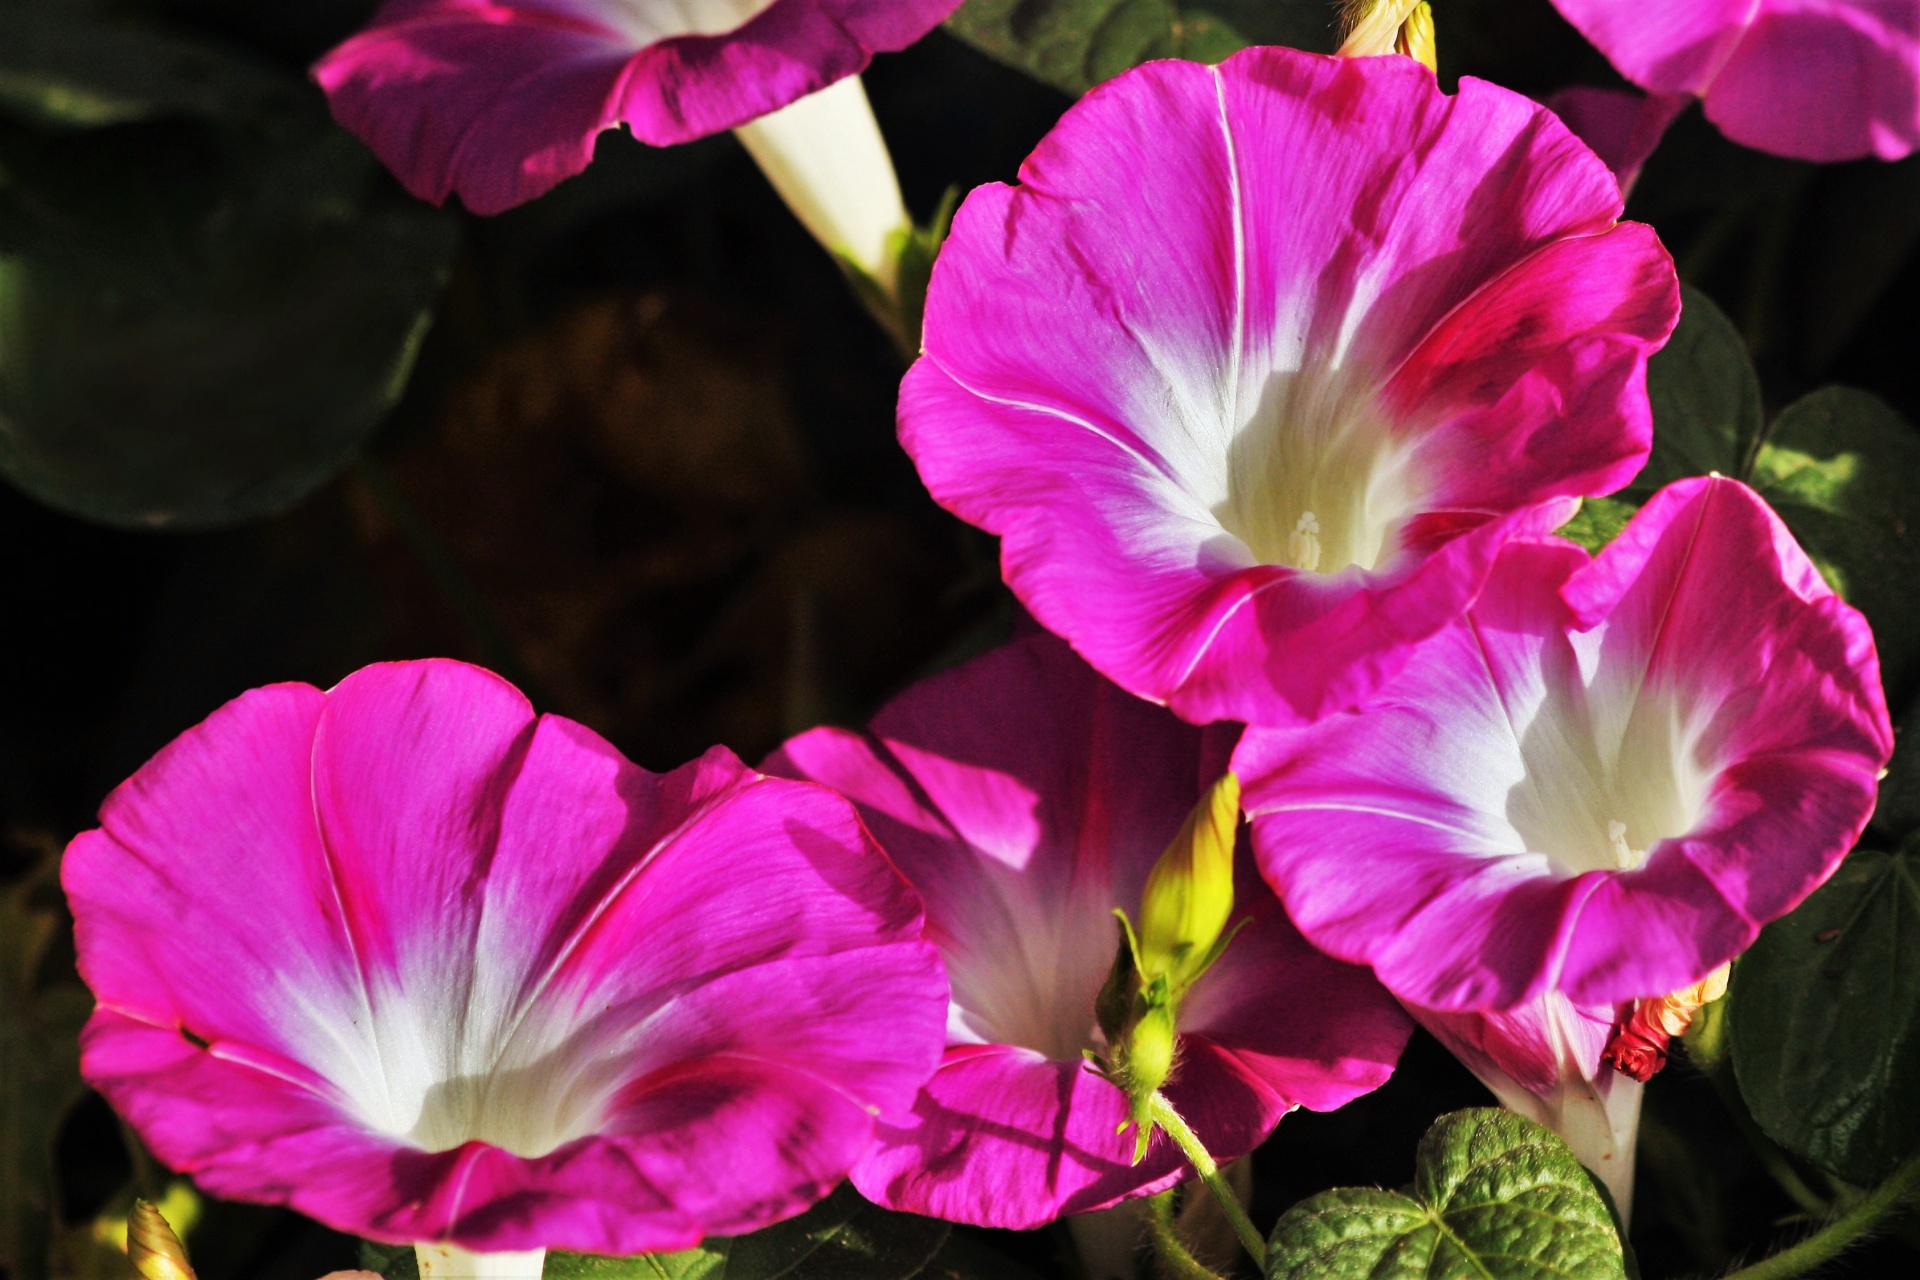 Close-up of a group of purple morning glories as they bloom in the early morning light, on a dark background.